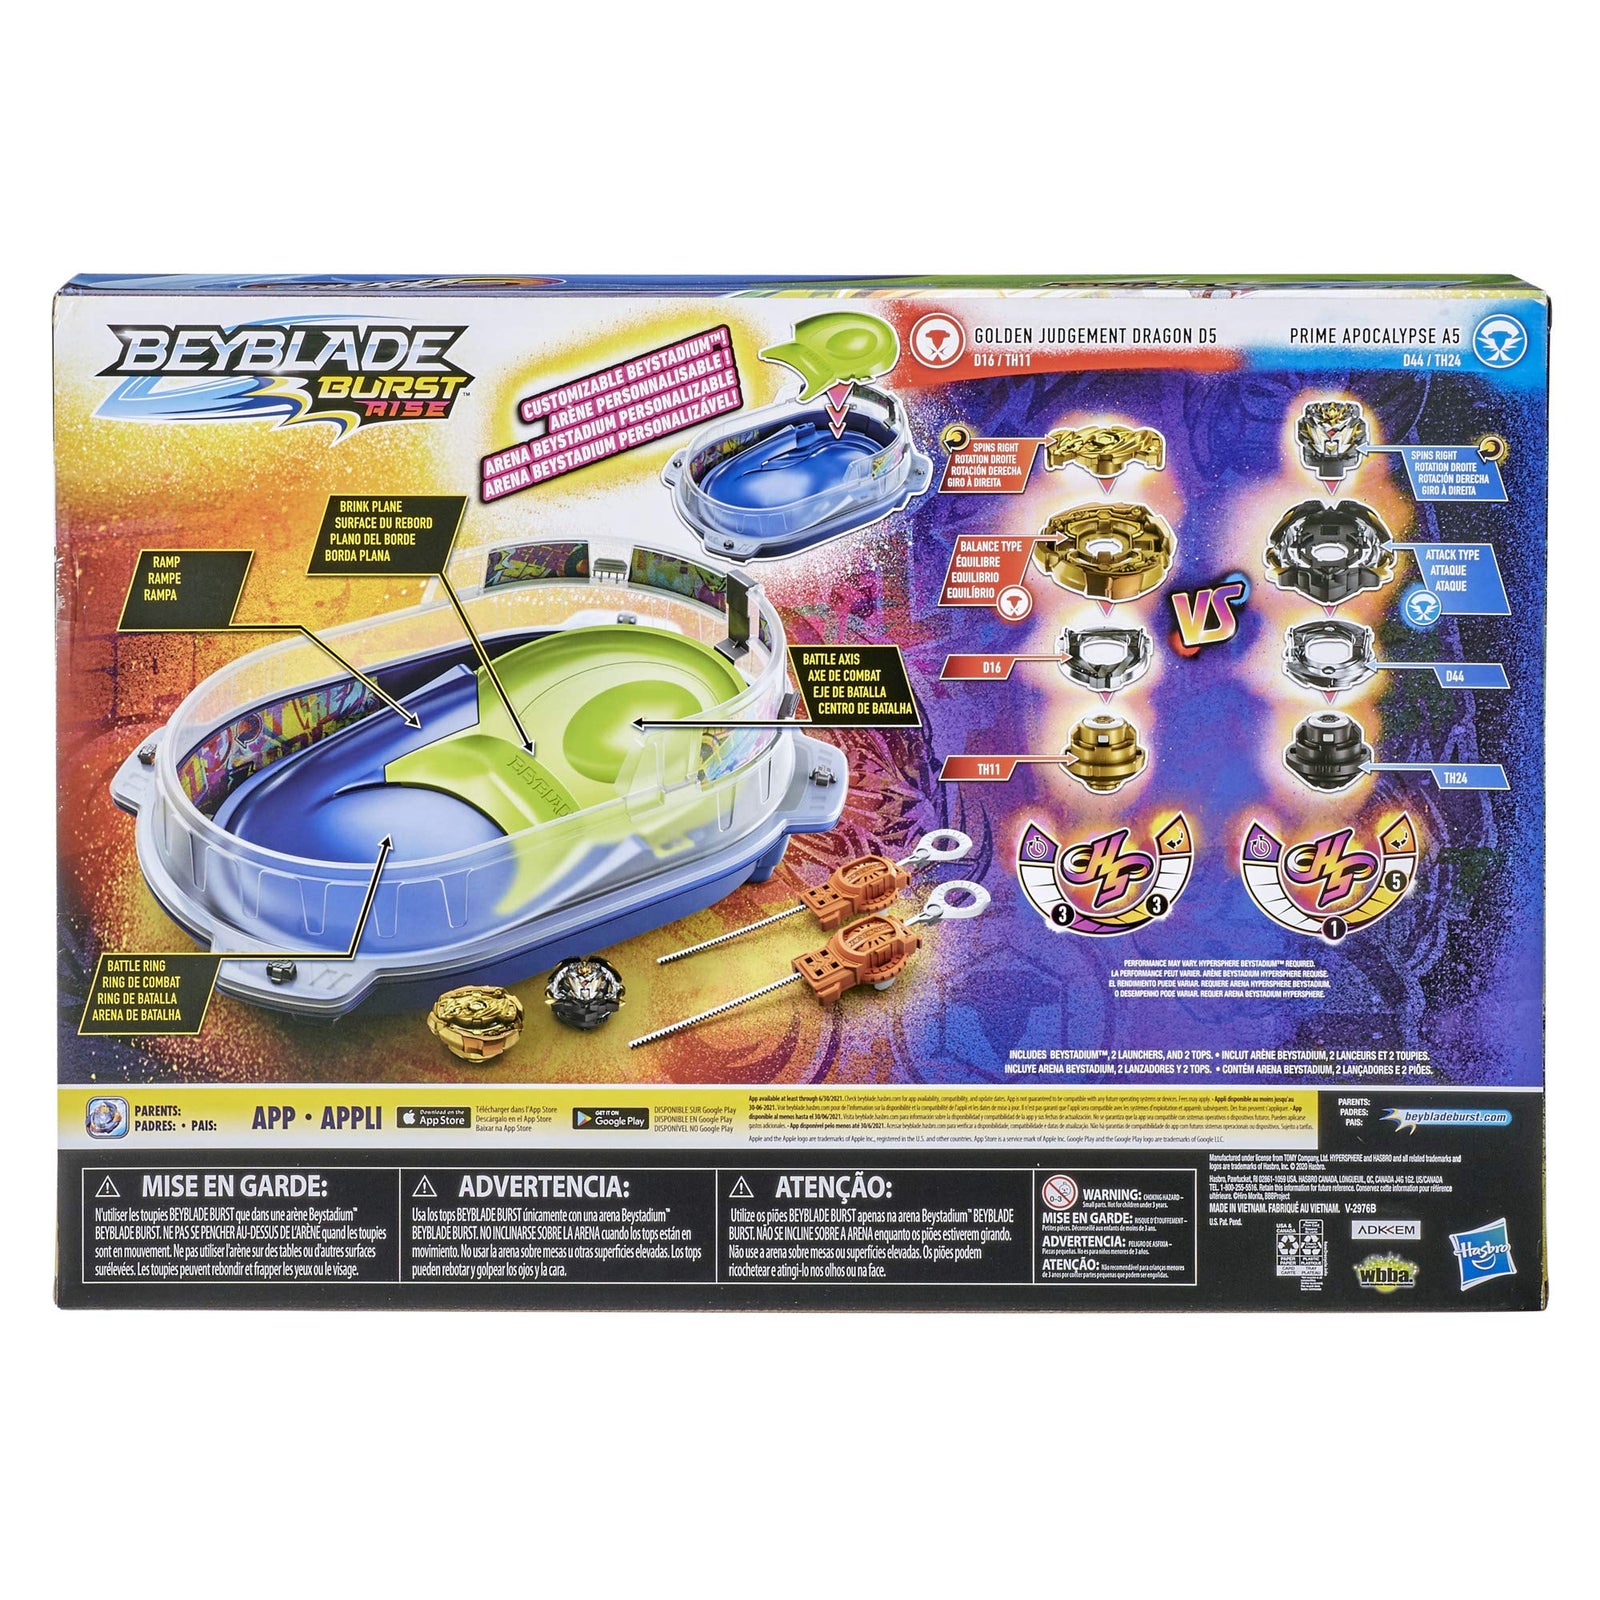 BEYBLADE Burst Rise Hypersphere Vortex Climb Battle Set -- Complete Set with Beystadium, 2 Battling Top Toys and 2 Launchers, Ages 8 and Up